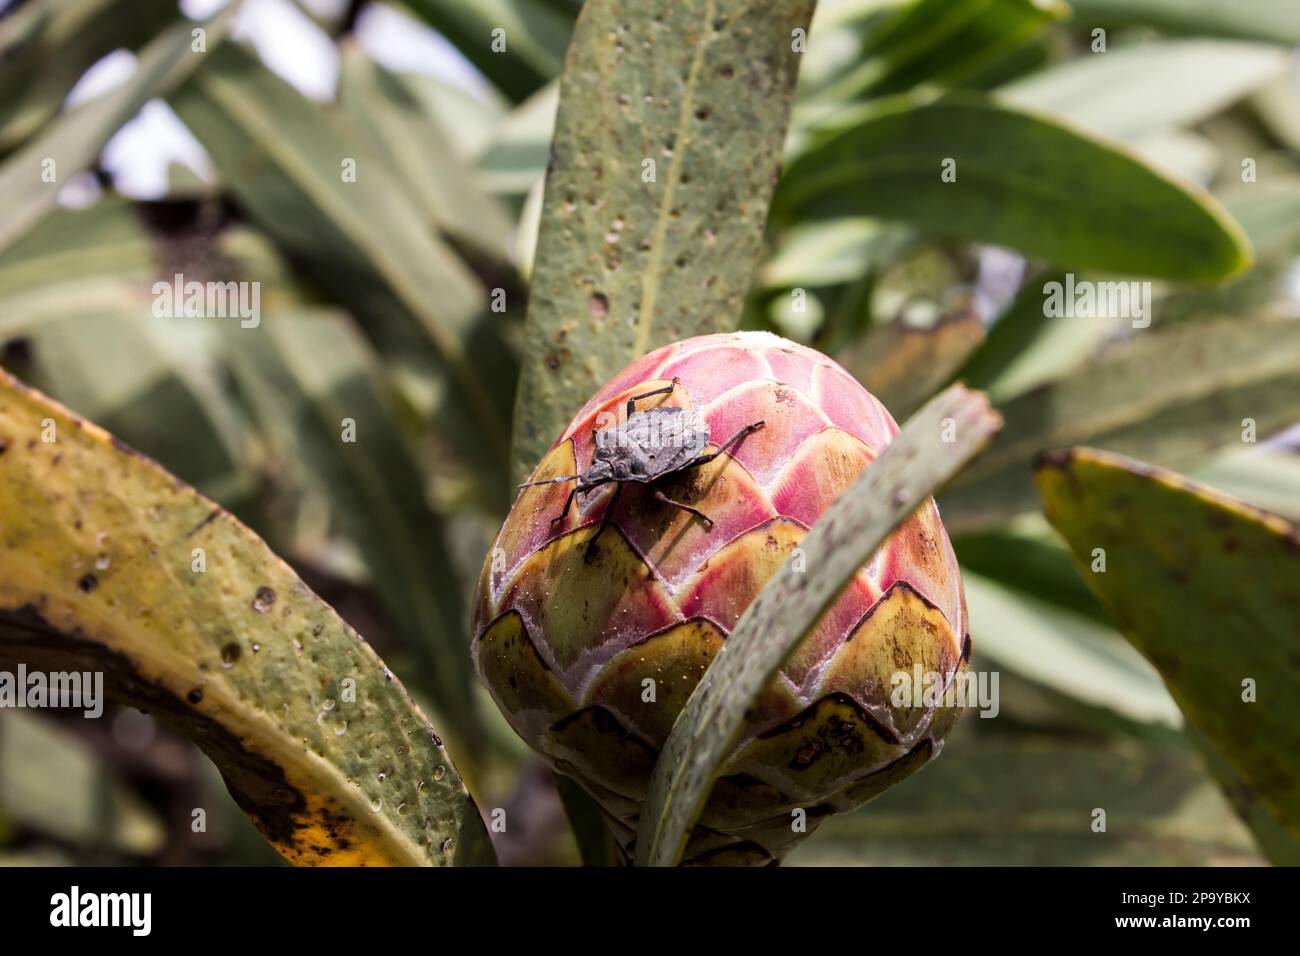 A bark stink bug on a Common Sugar Bush Protea flower bud in the Kloofendal nature reserve, Roodepoort, South Africa. Stock Photo